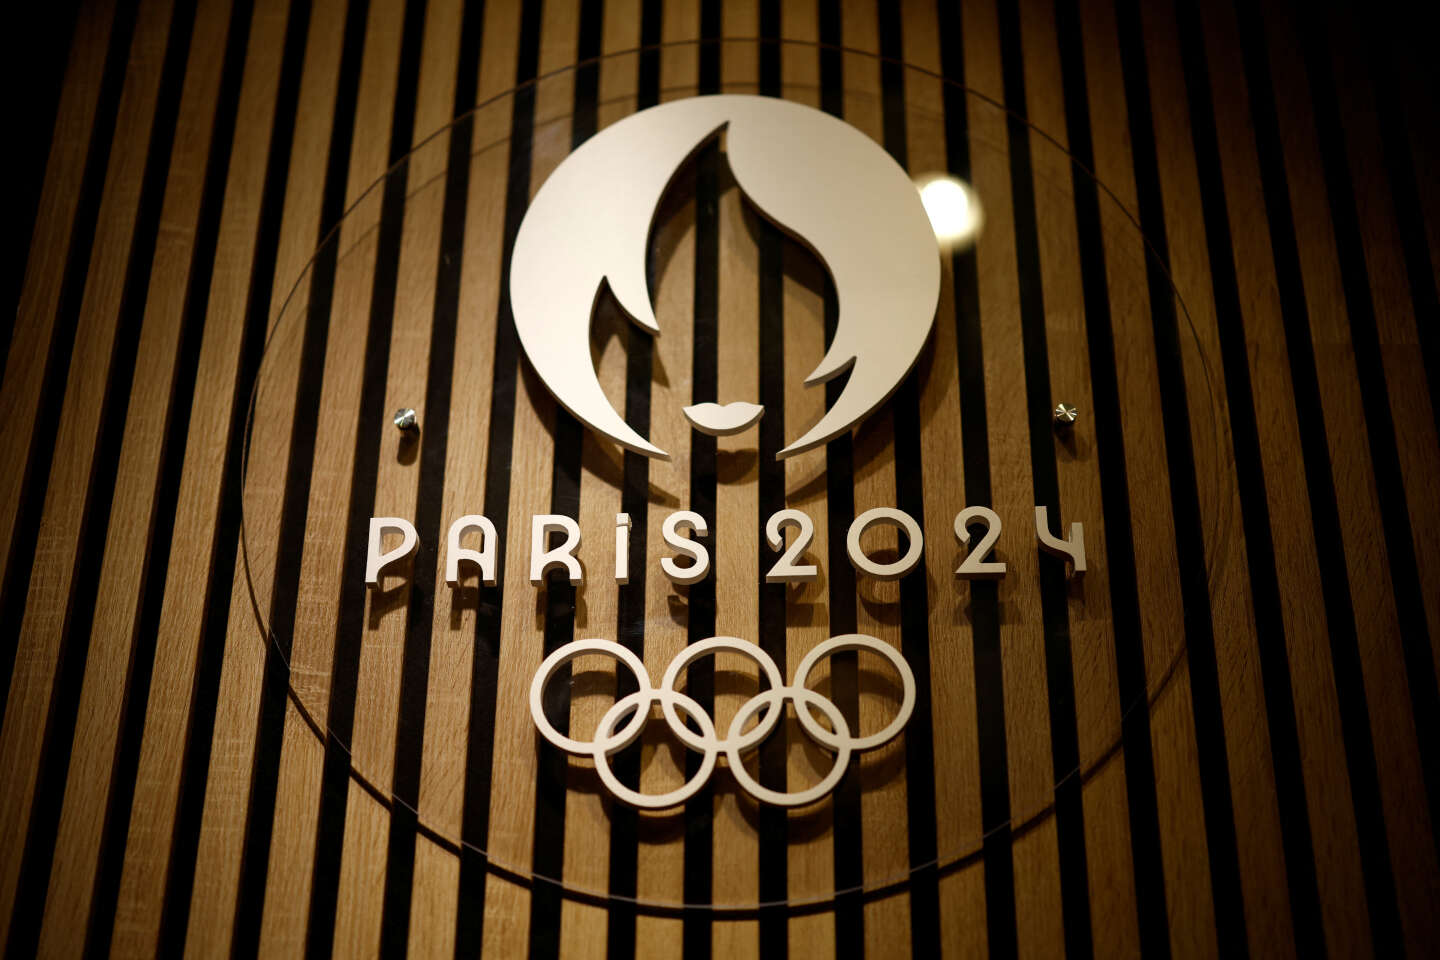 Paris 2024: What legacy will the Olympics leave?